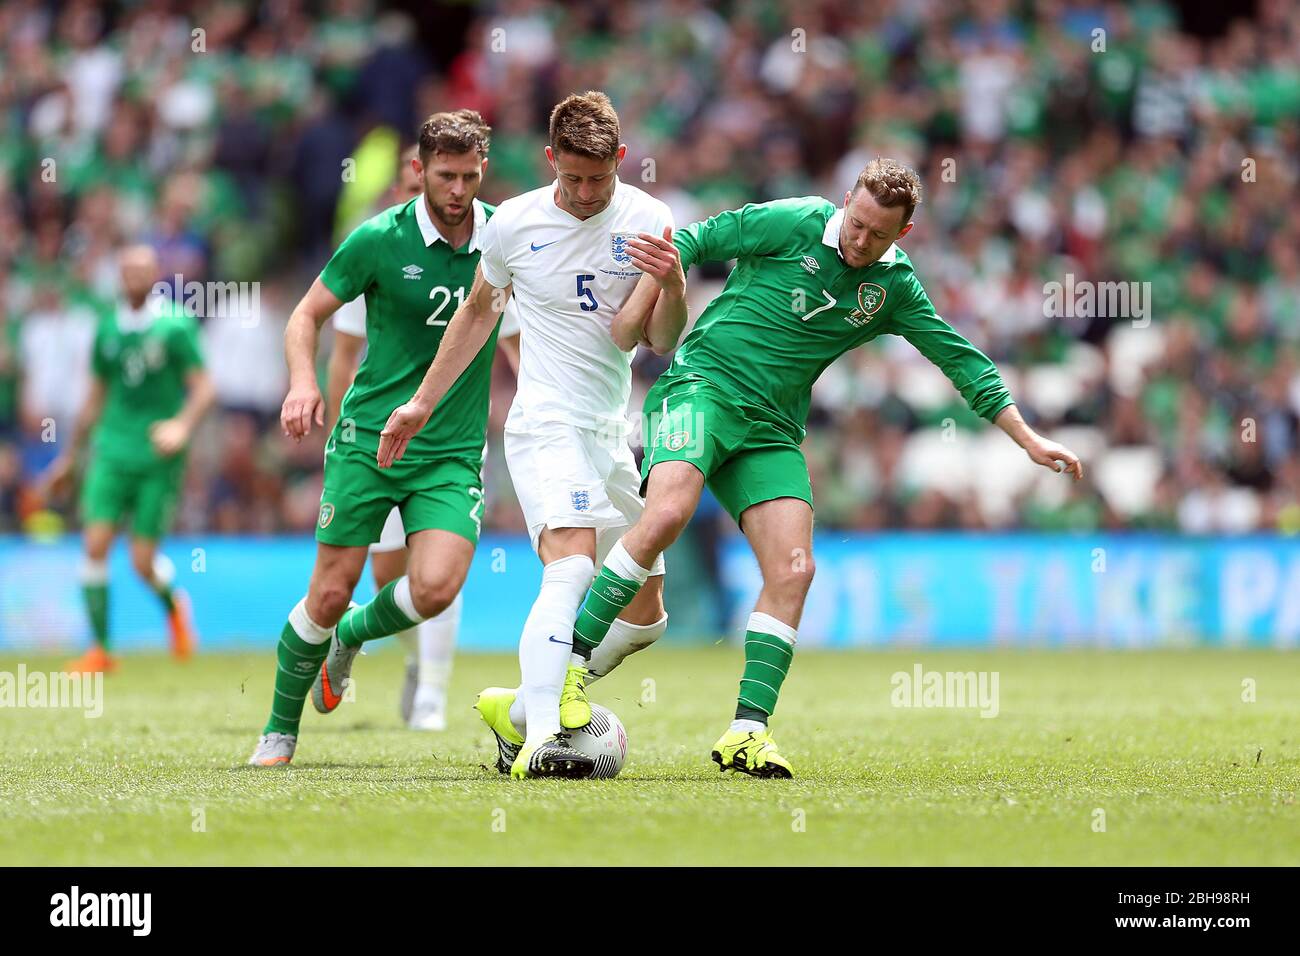 DUBLIN, REP OF IRELAND. Gary Cahill of England battles with Aiden McGeady of Ireland during the International Friendly match between the Republic of Ireland & England at the Aviva Stadium, Dublin, Ireland on Sunday June 7th 2015 (Credit: MI News) Stock Photo